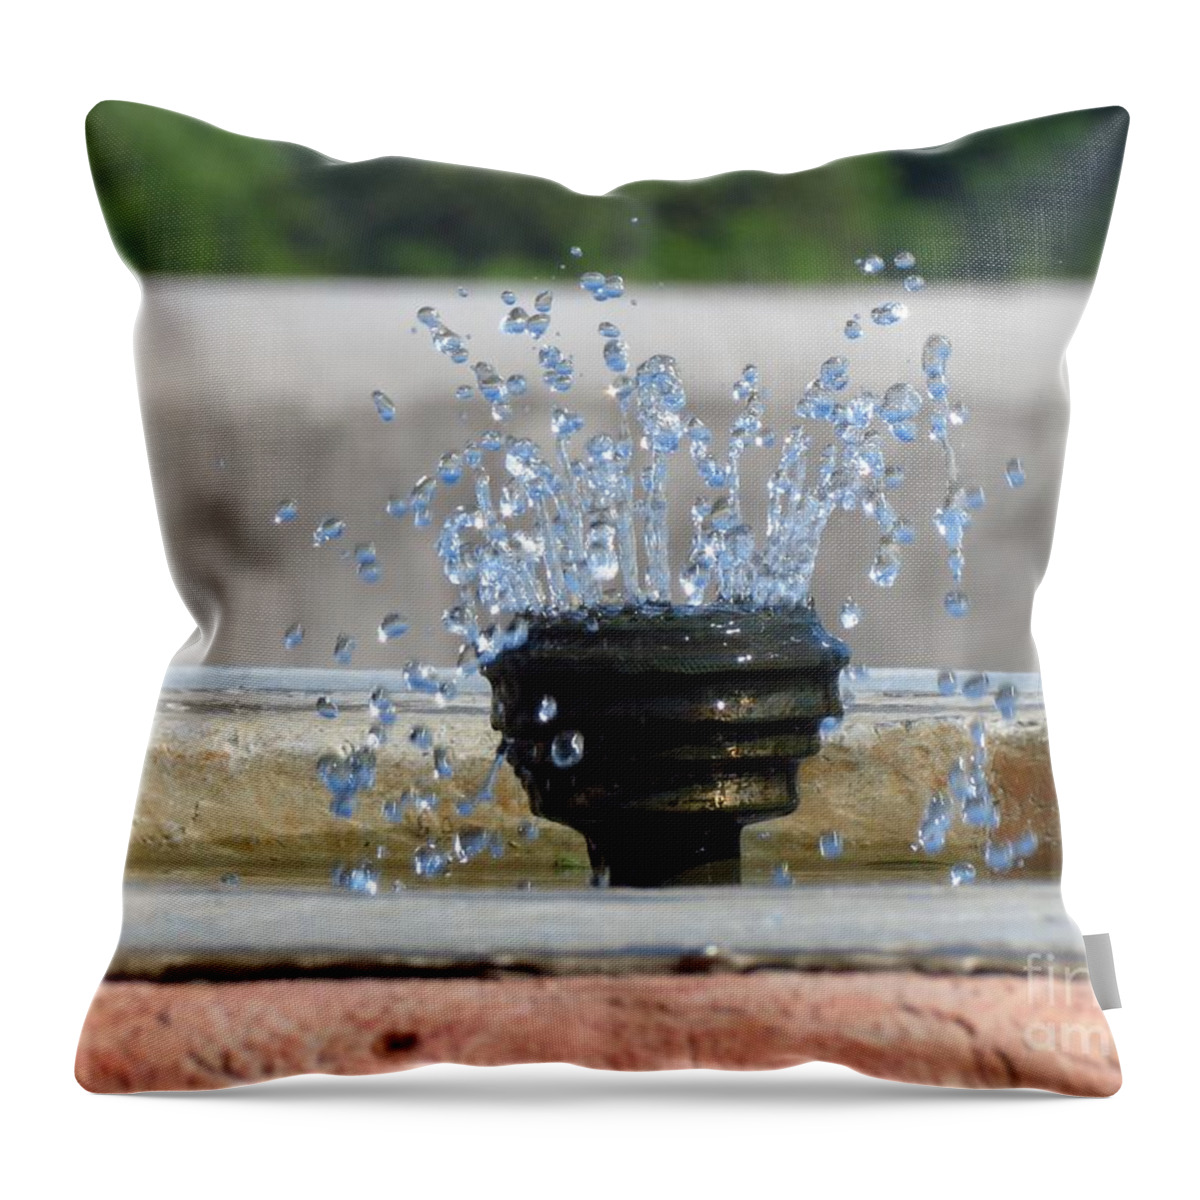 Water Droplets Throw Pillow featuring the photograph Catching Water by Anita Adams